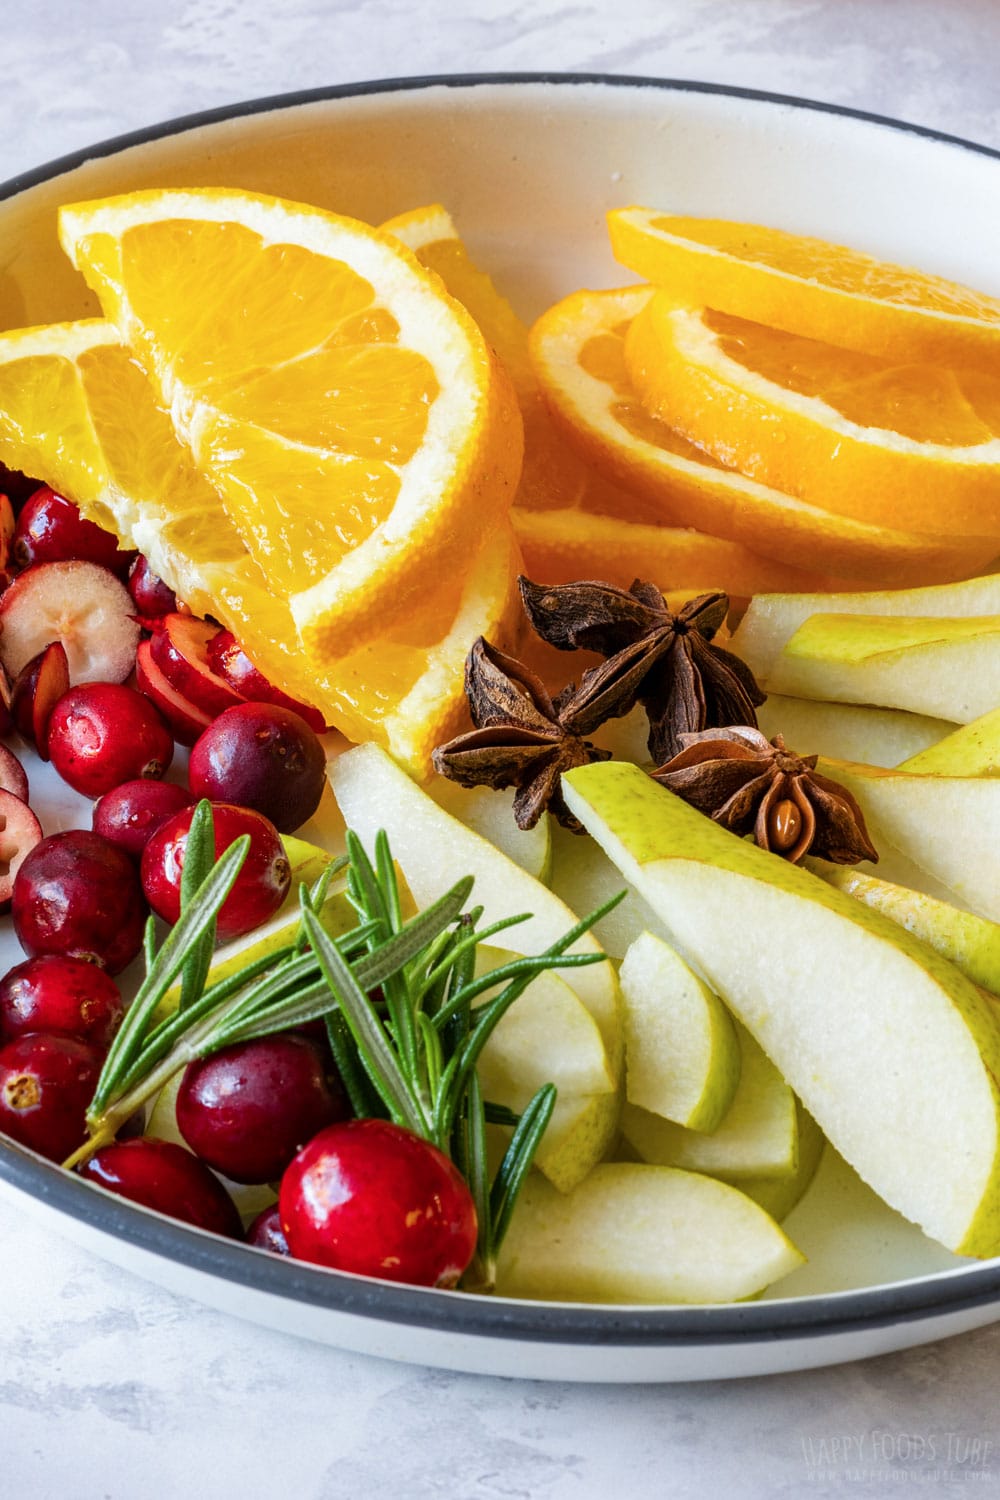 Fresh cranberries and sliced oranges, pears.